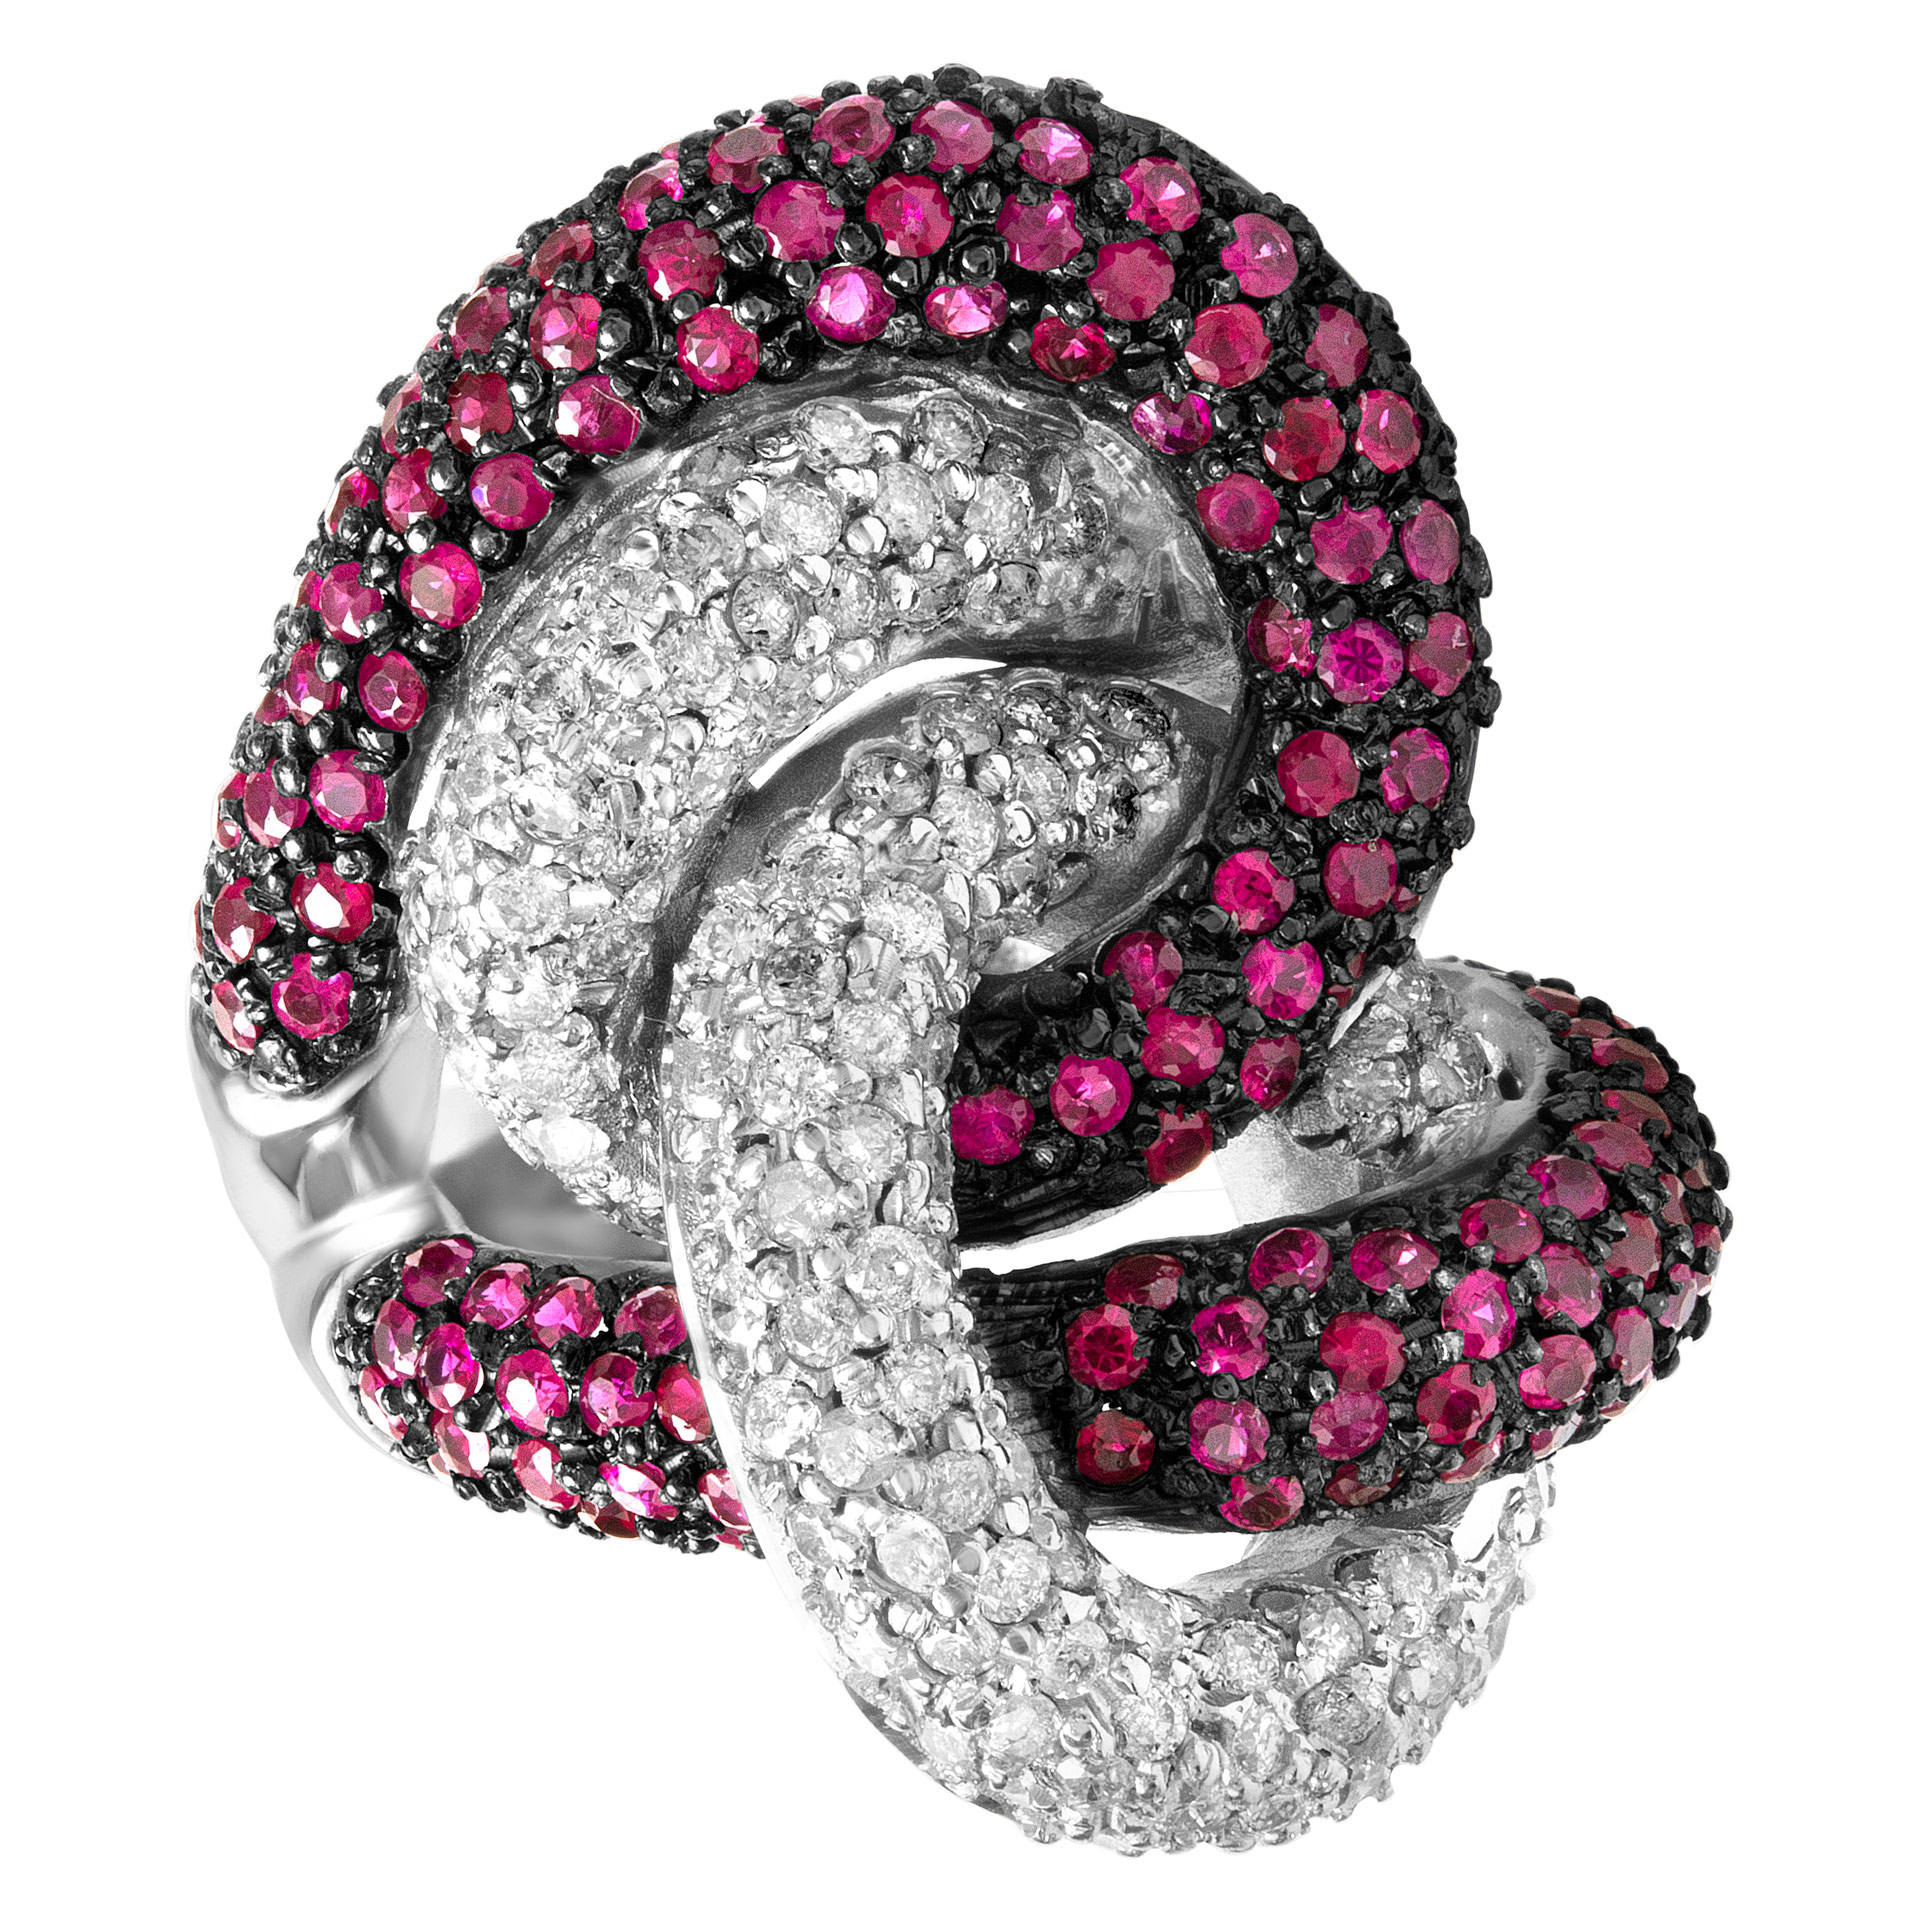 Diamond & ruby ring in 18k white gold. Total diamonds approx weight: 2.02 carats, rubies: 1.10 carat. ds